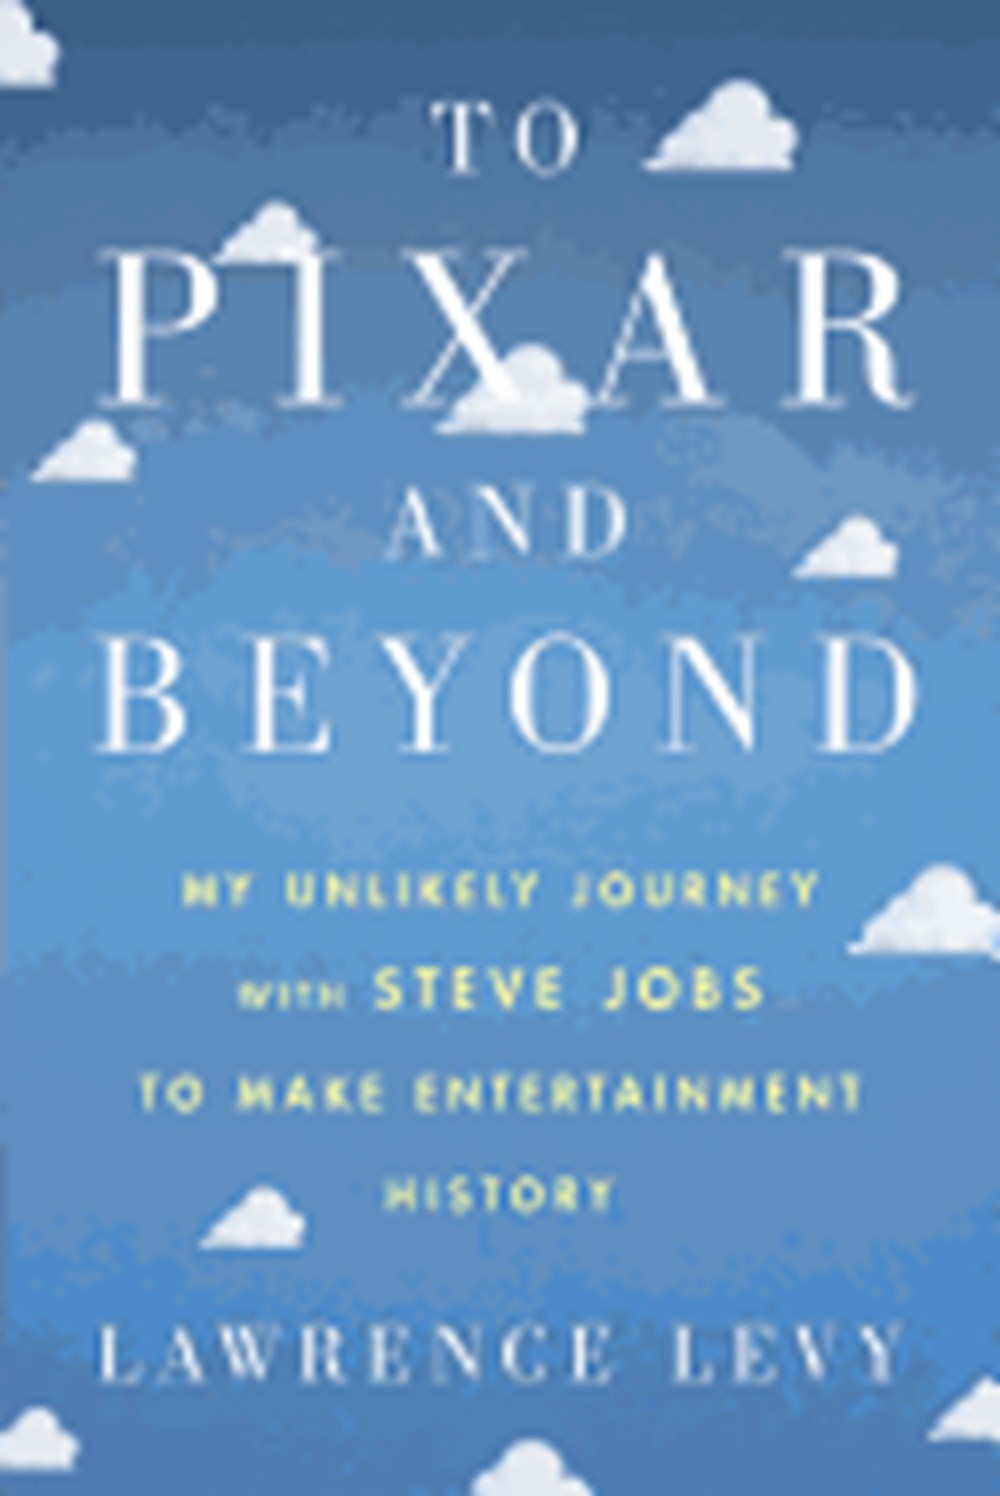 To Pixar and Beyond My Unlikely Journey with Steve Jobs to Make Entertainment History